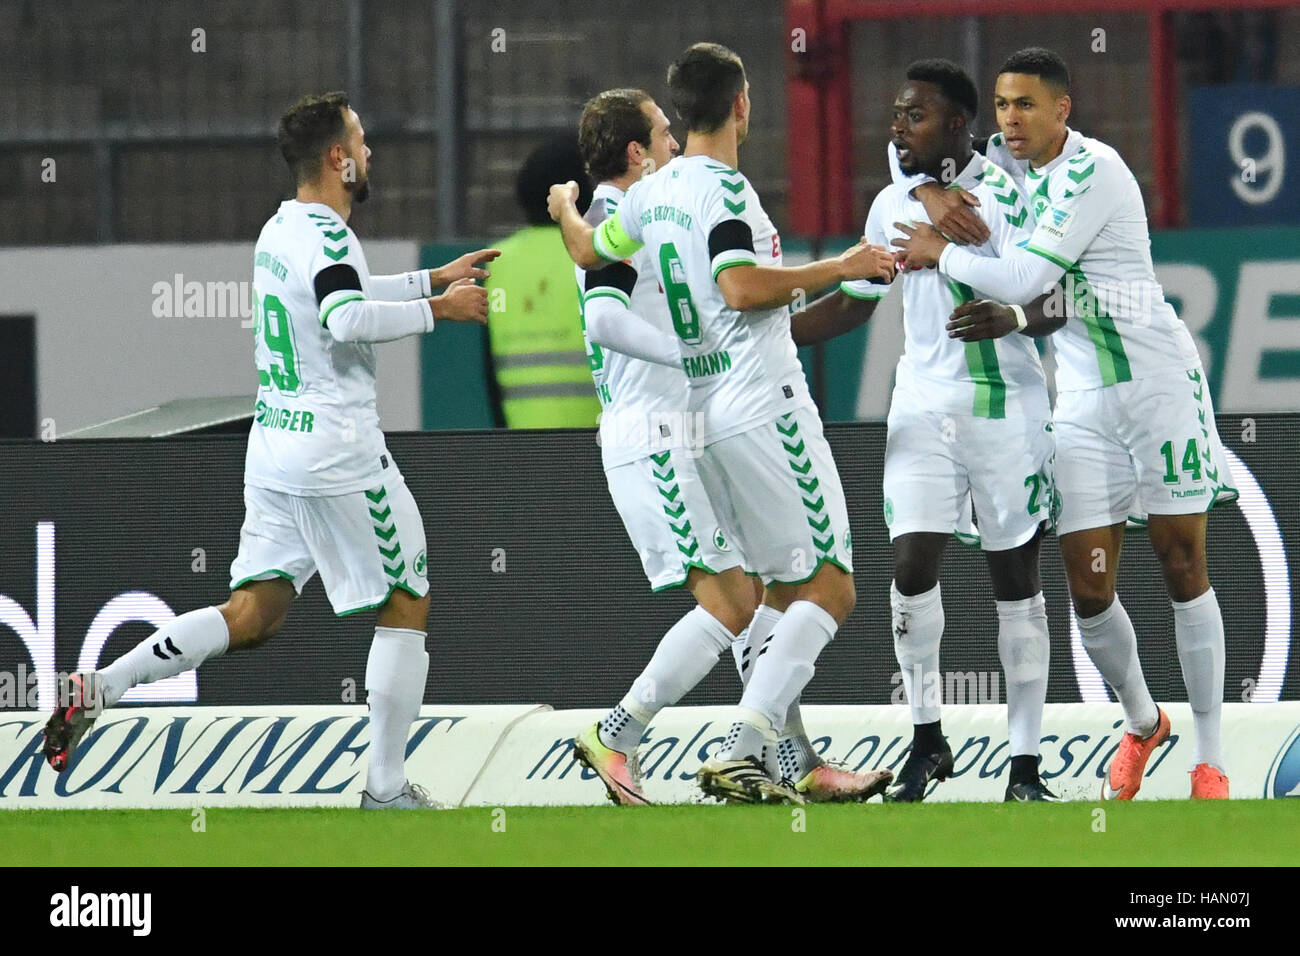 Karlsruhe, Germany. 2nd Dec, 2016. Khaled Narey (R) of Fuerth cheers over the 0-1 score with Mathis Bolly and more of his teammates during the German 2. Bundesliga soccer match between Karlsruher SC and SpVgg Greuther Fuerth at the Wildparkstadium in Karlsruhe, Germany, 2 December 2016. (EMBARGO CONDITIONS - ATTENTION: Due to the accreditation guidelines, the DFL only permits the publication and utilisation of up to 15 pictures per match on the internet and in online media during the match.) Photo: Uwe Anspach/dpa/Alamy Live News Stock Photo